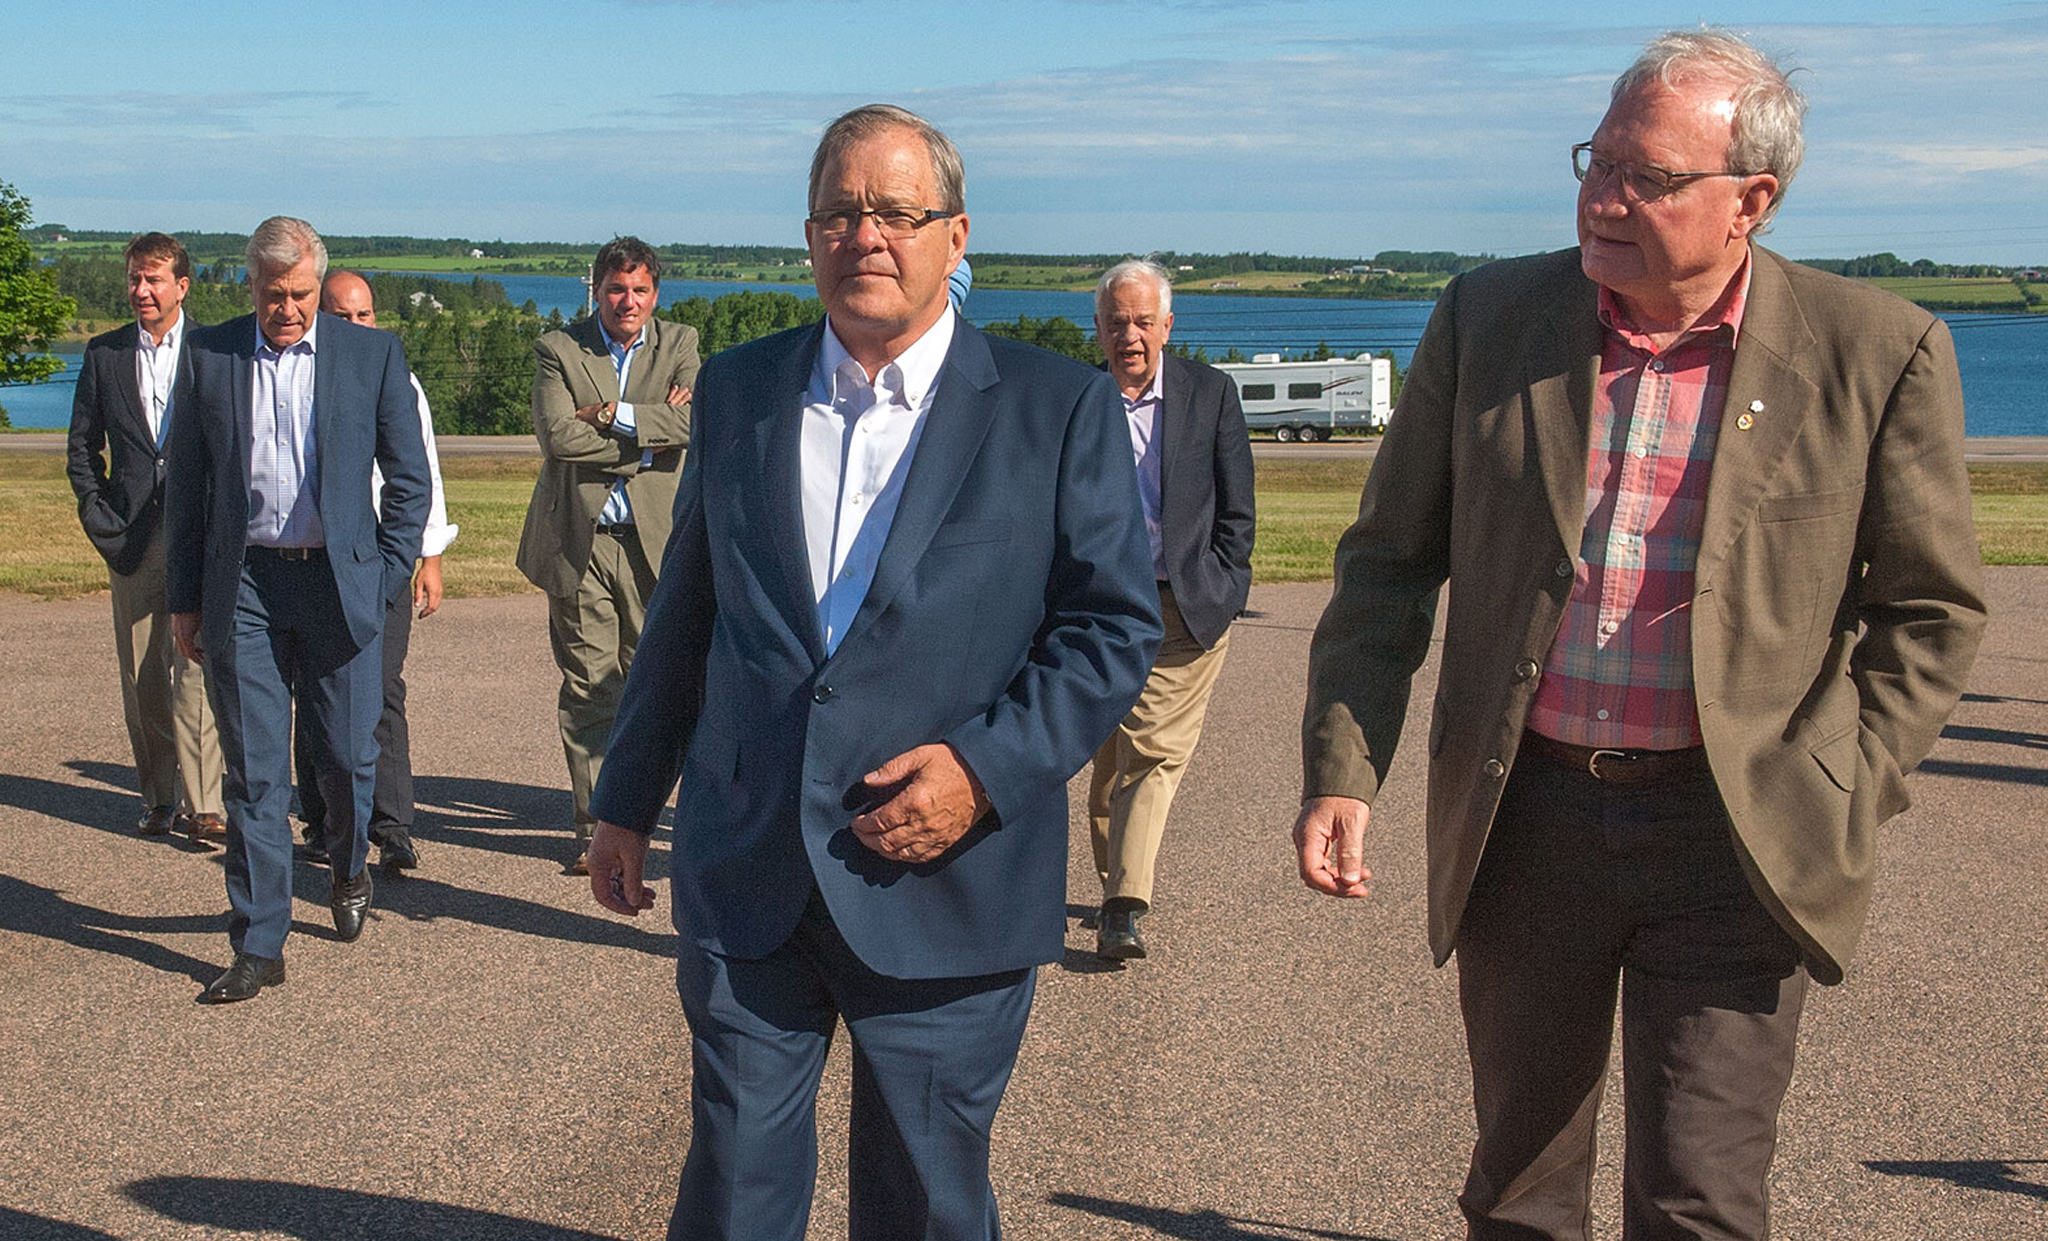 The Honourable Lawrence MacAulay, Minister of Agriculture and Agri-food (centre), and the Honourable Wade MacLauchlan, Premier of Prince Edward Island (right), followed by various federal ministers and provincial premiers.